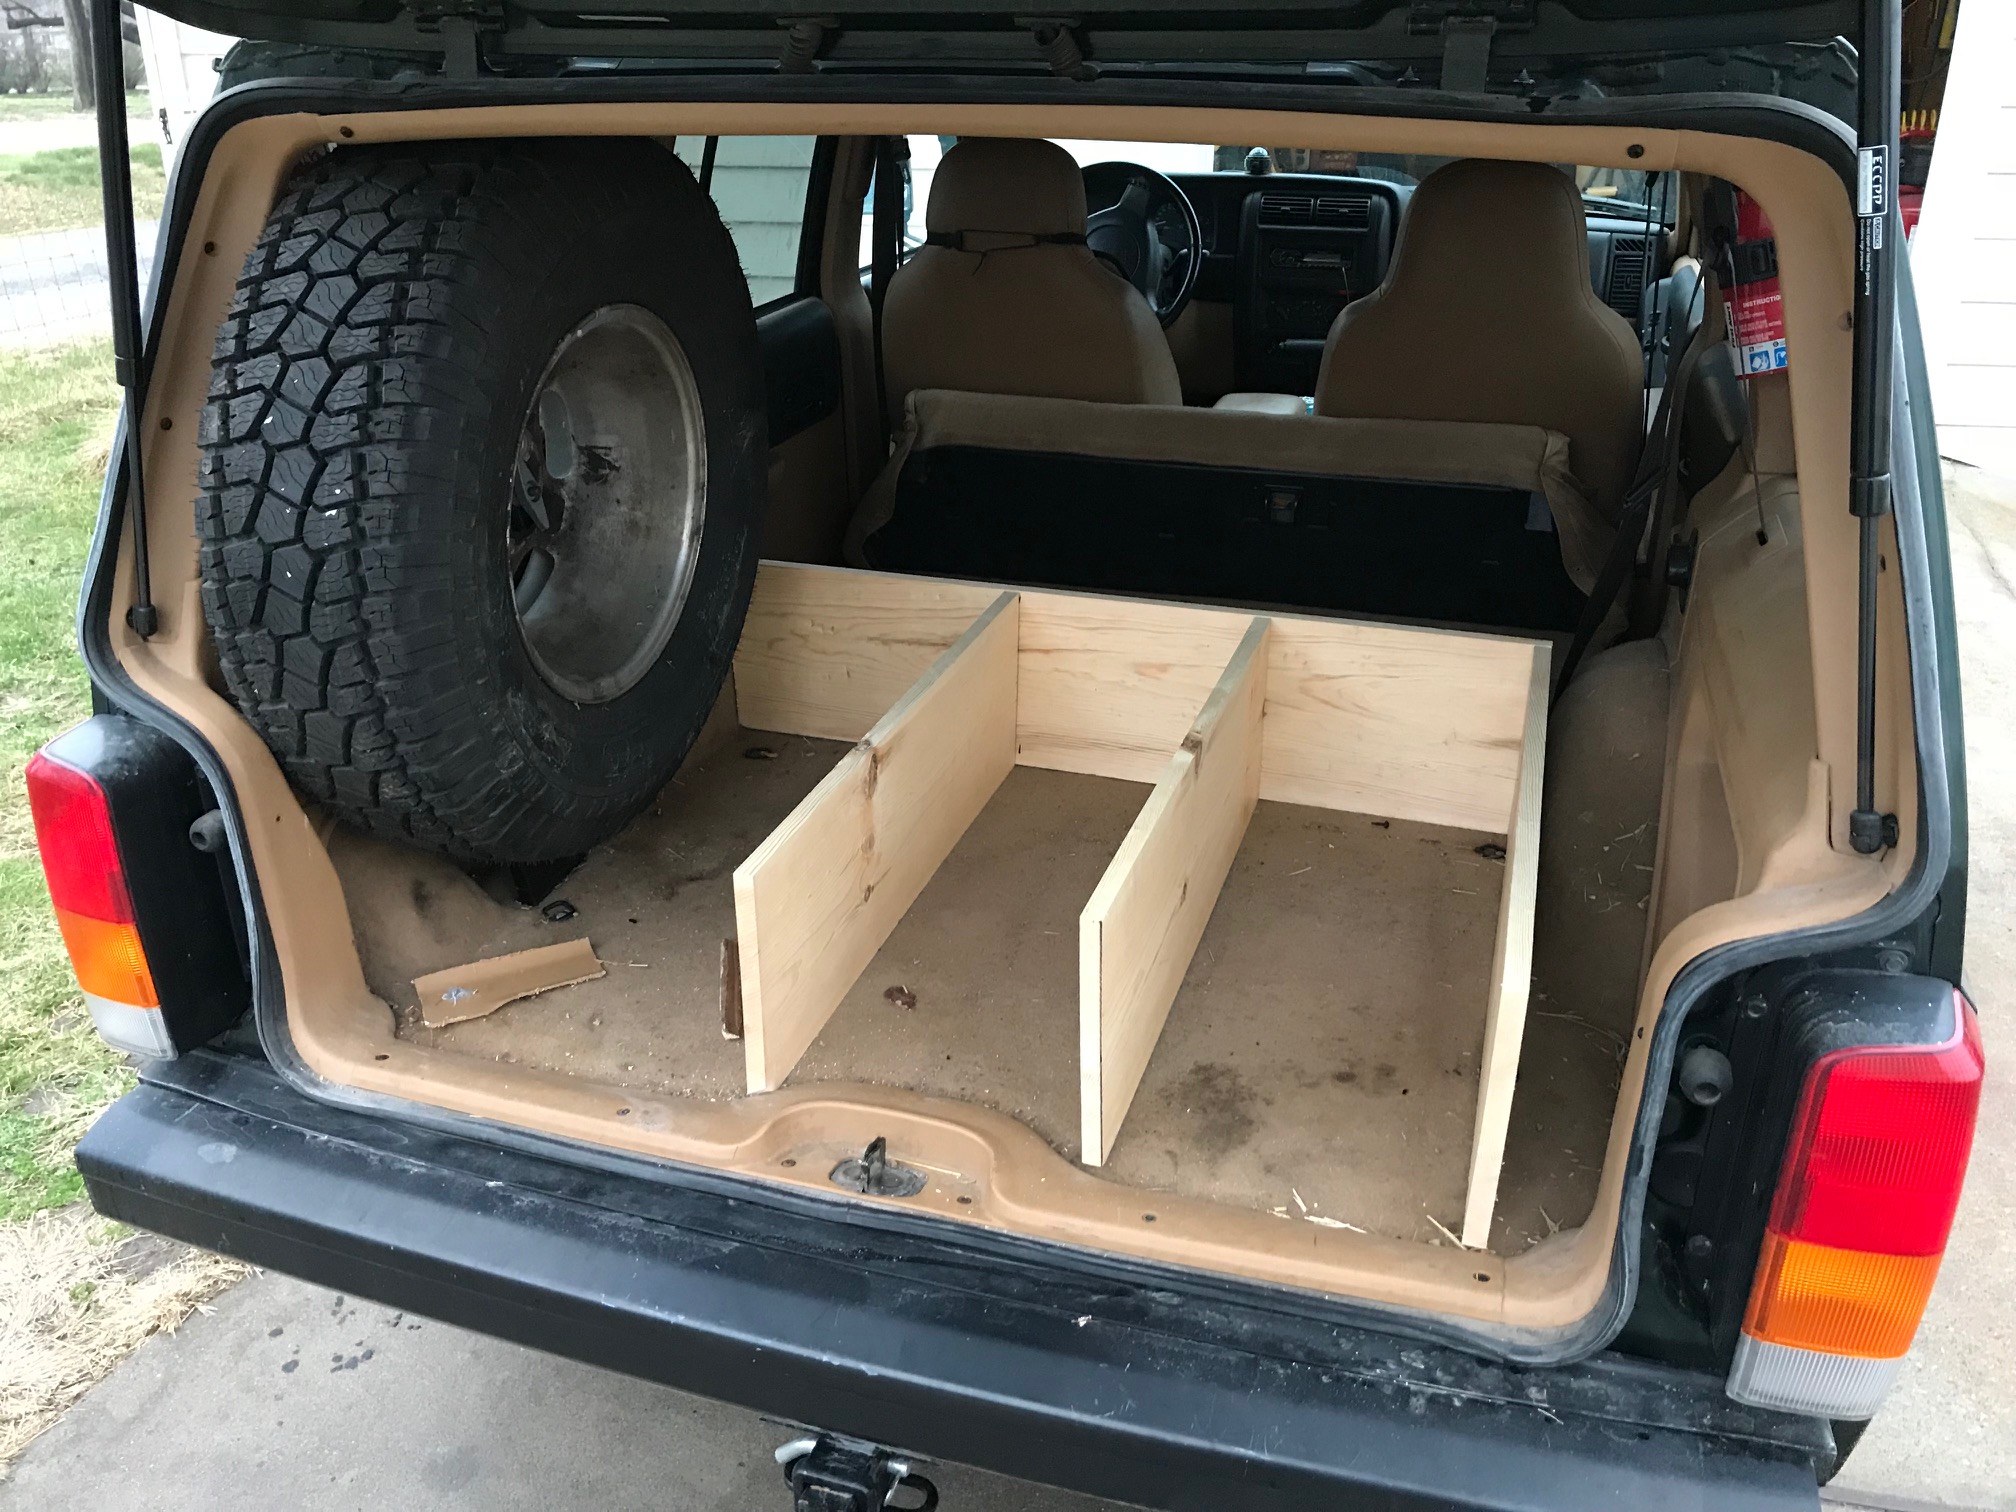 One Day Build: Stow and go storage system & cargo platform for